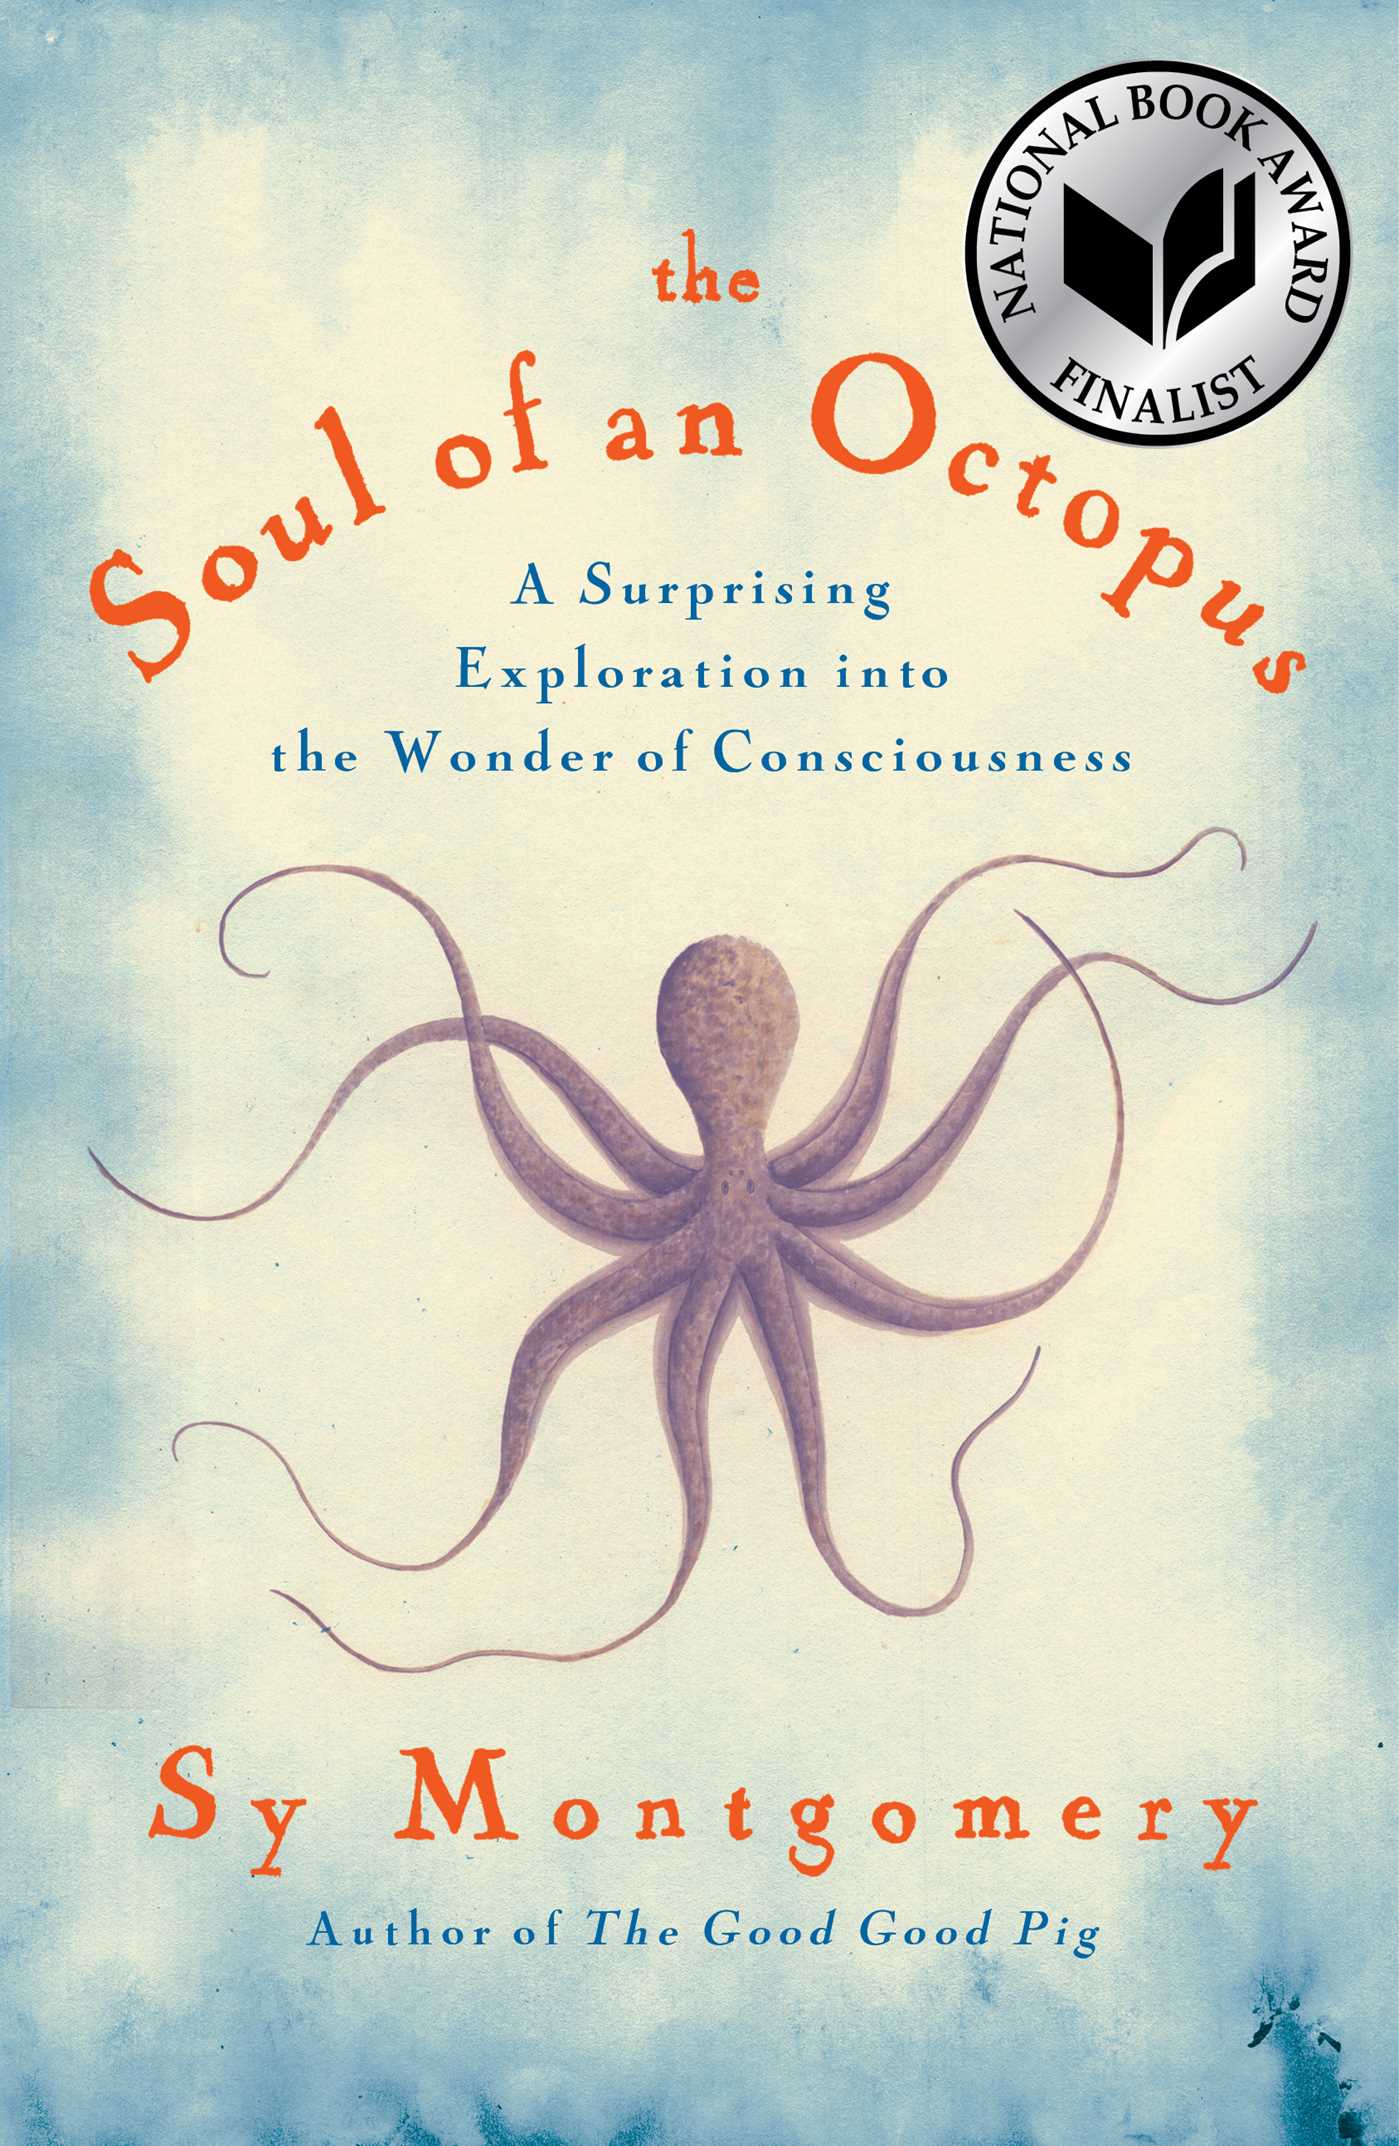 Sy Montgomery: The soul of an octopus (2015)